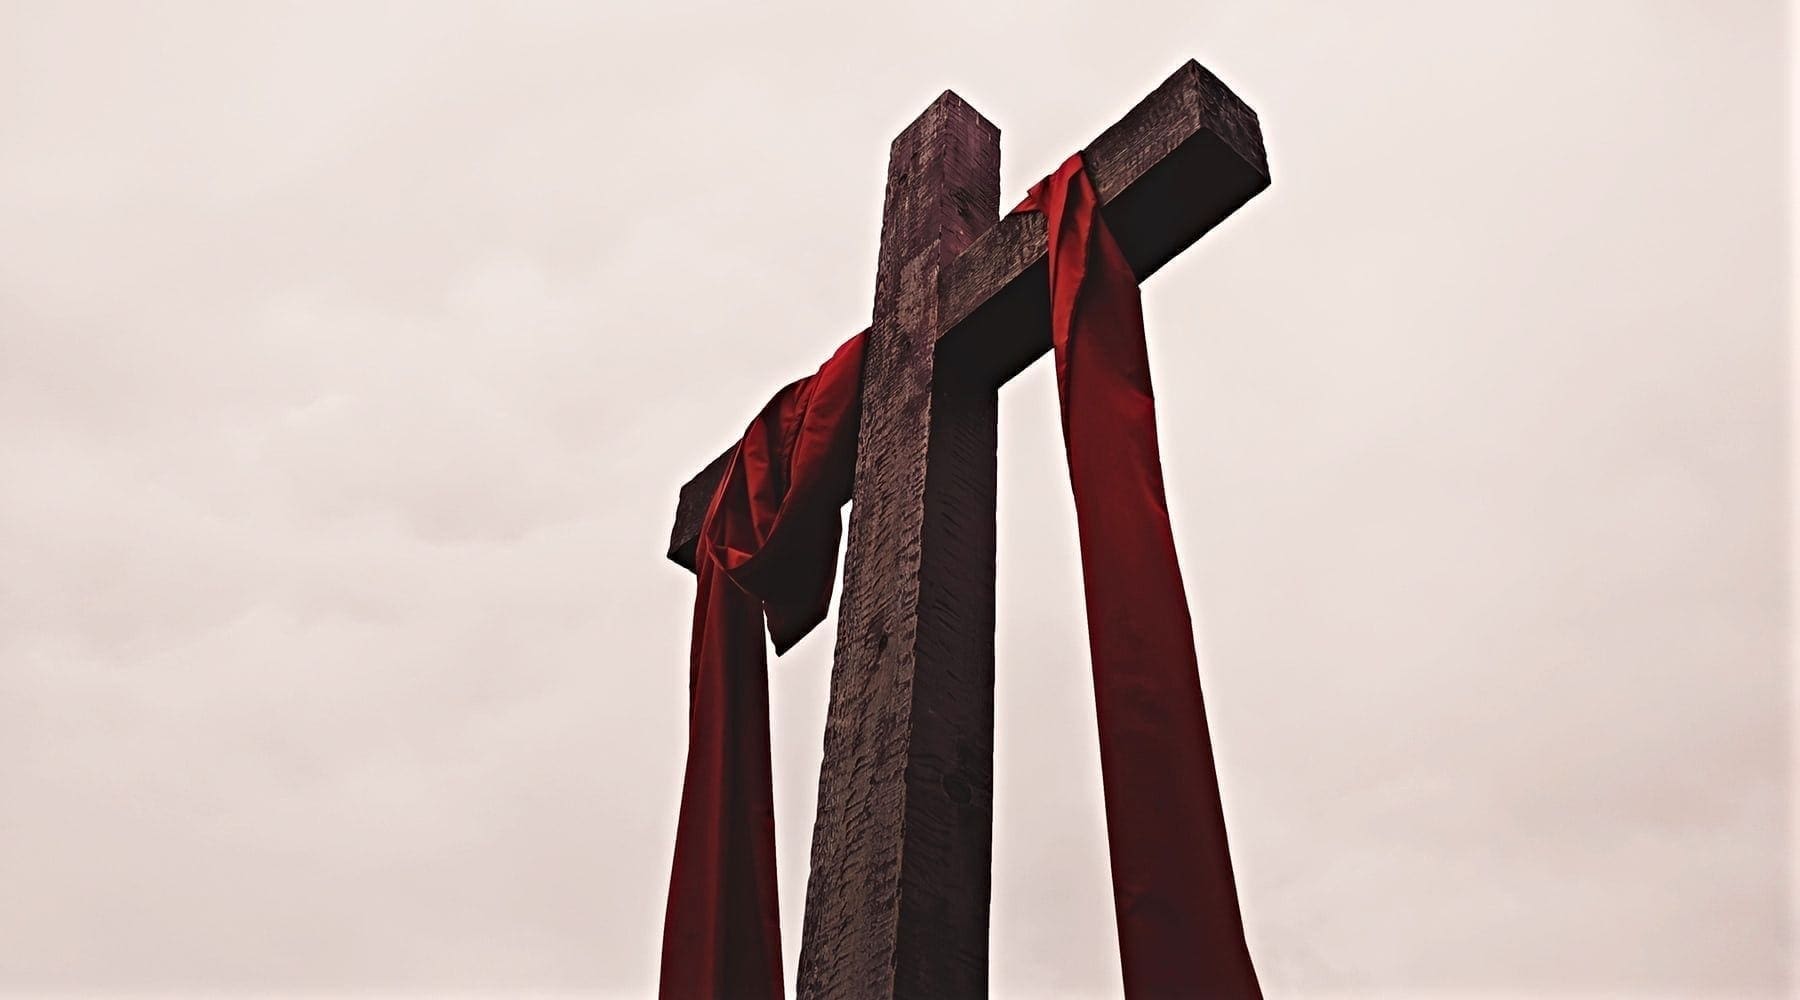 Lenten Lectionary | Easter 2020: Can Fear, Grief, Joy Coexist Together?